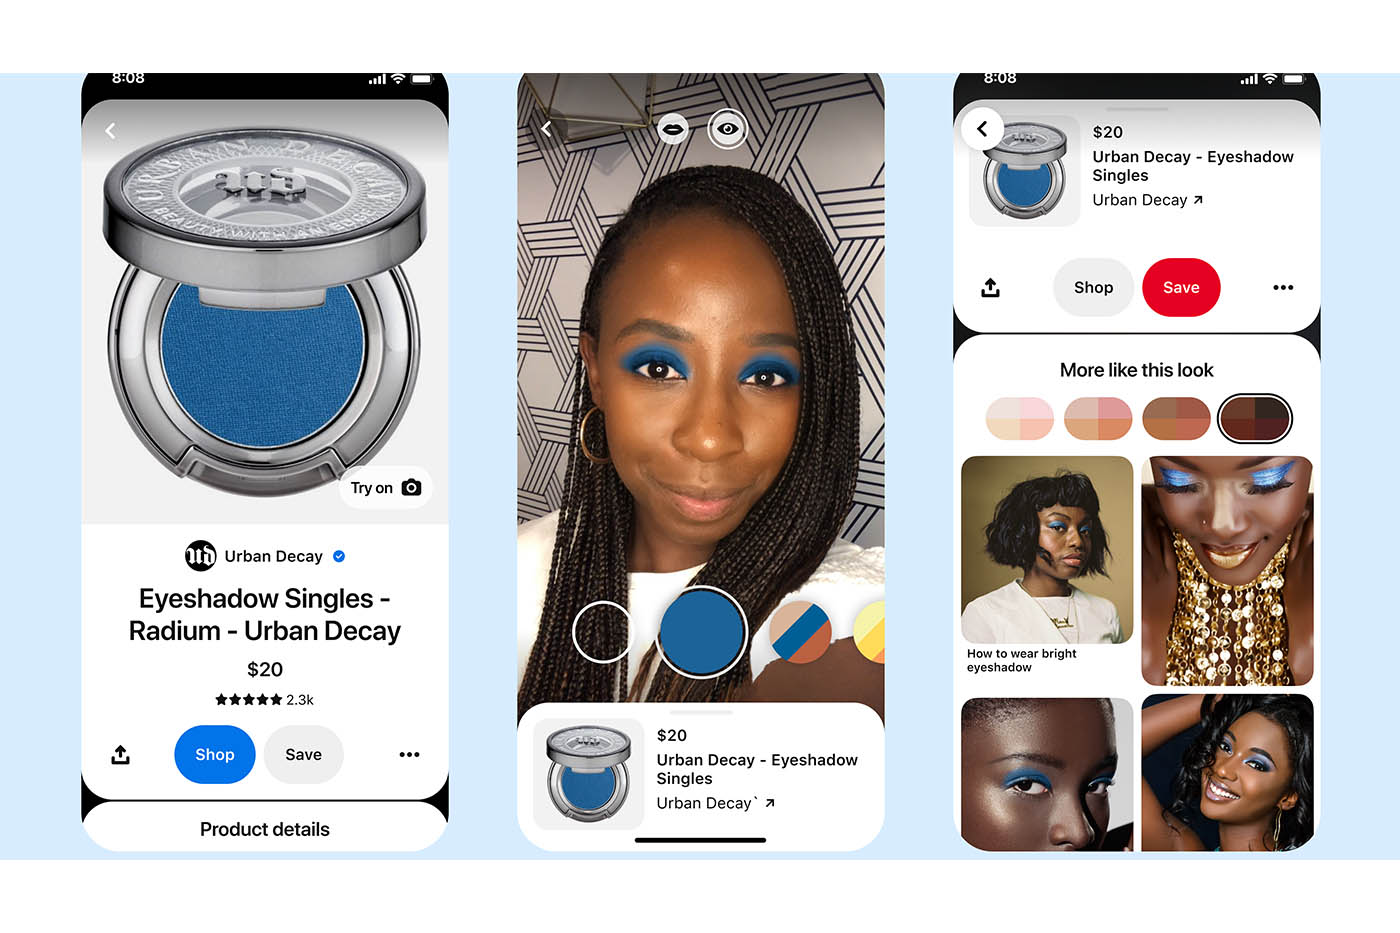 Pinterest offers virtual eyeshadow  try-on experience